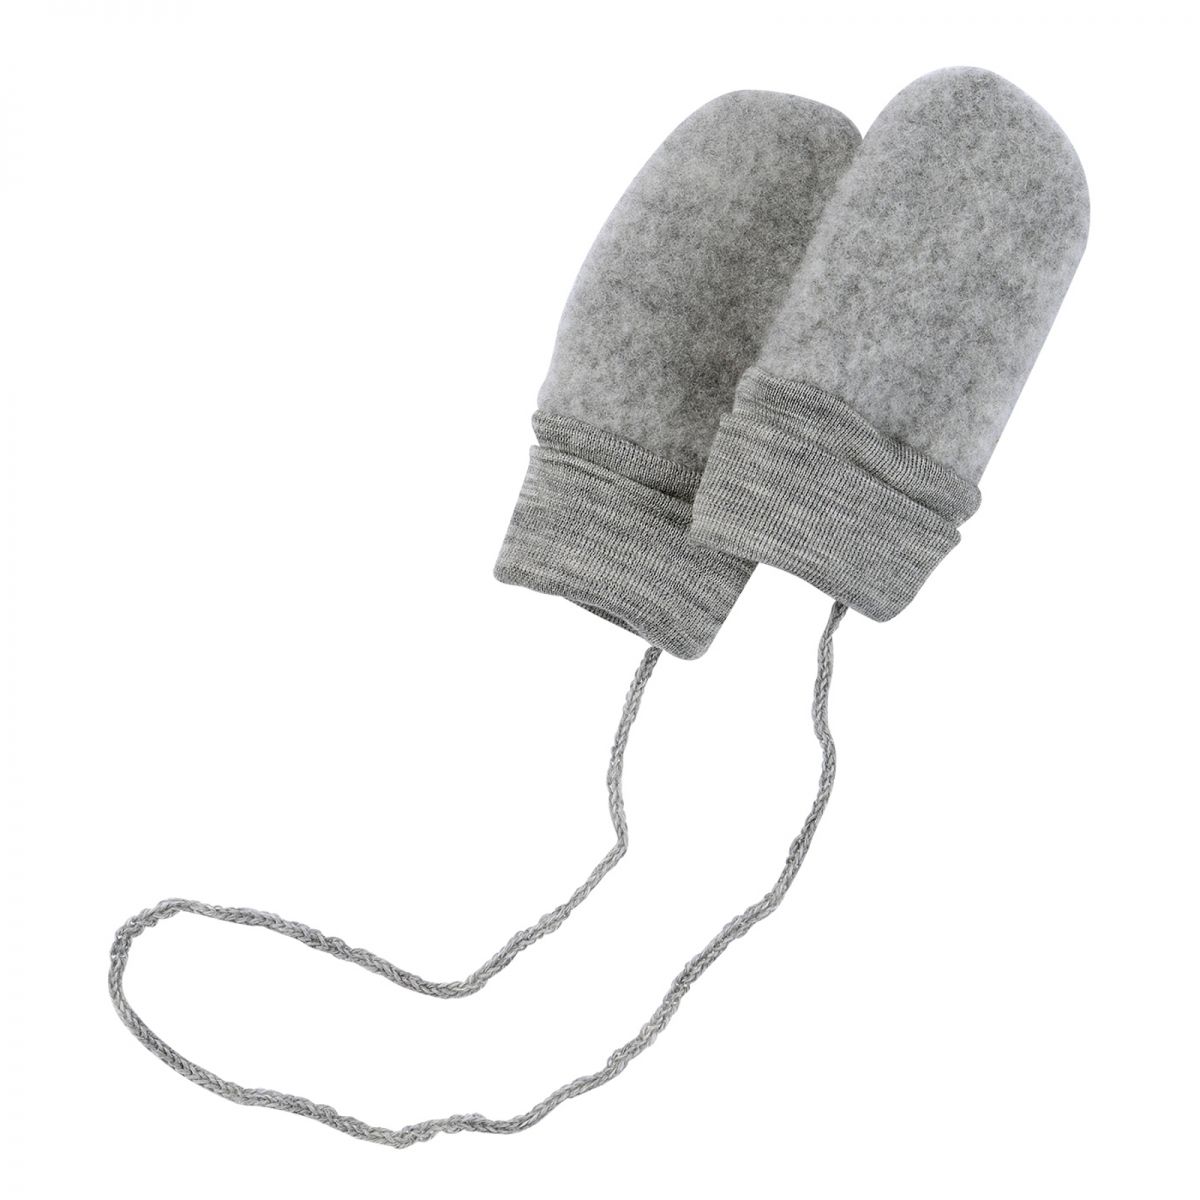 ENGEL Natur Baby-mittens without thumb light Grey melange 575570-091 